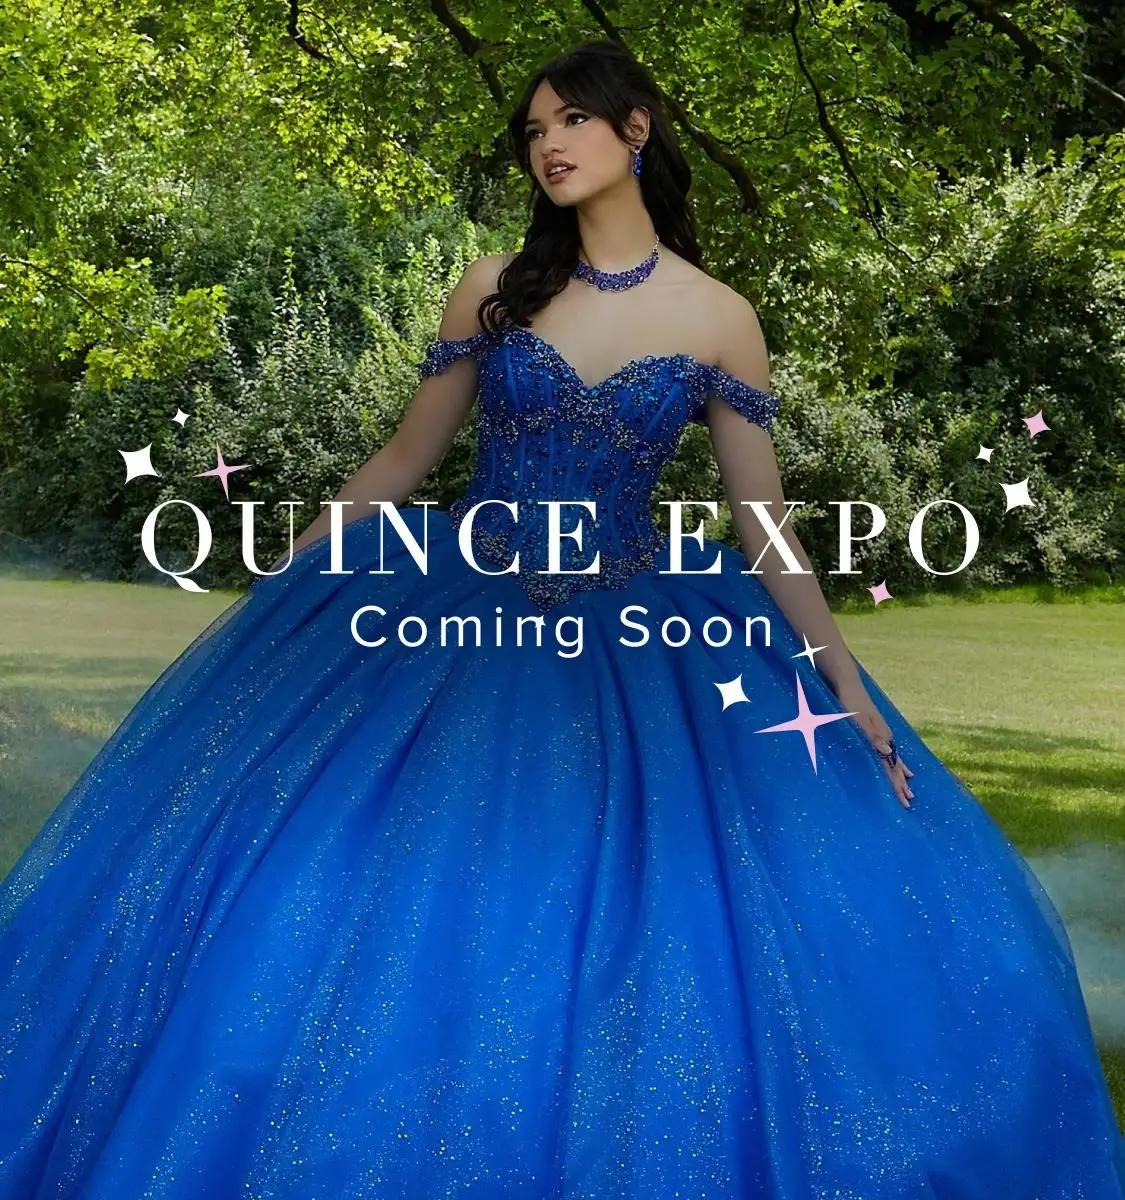 Quince Expo Coming Soon mobile banner